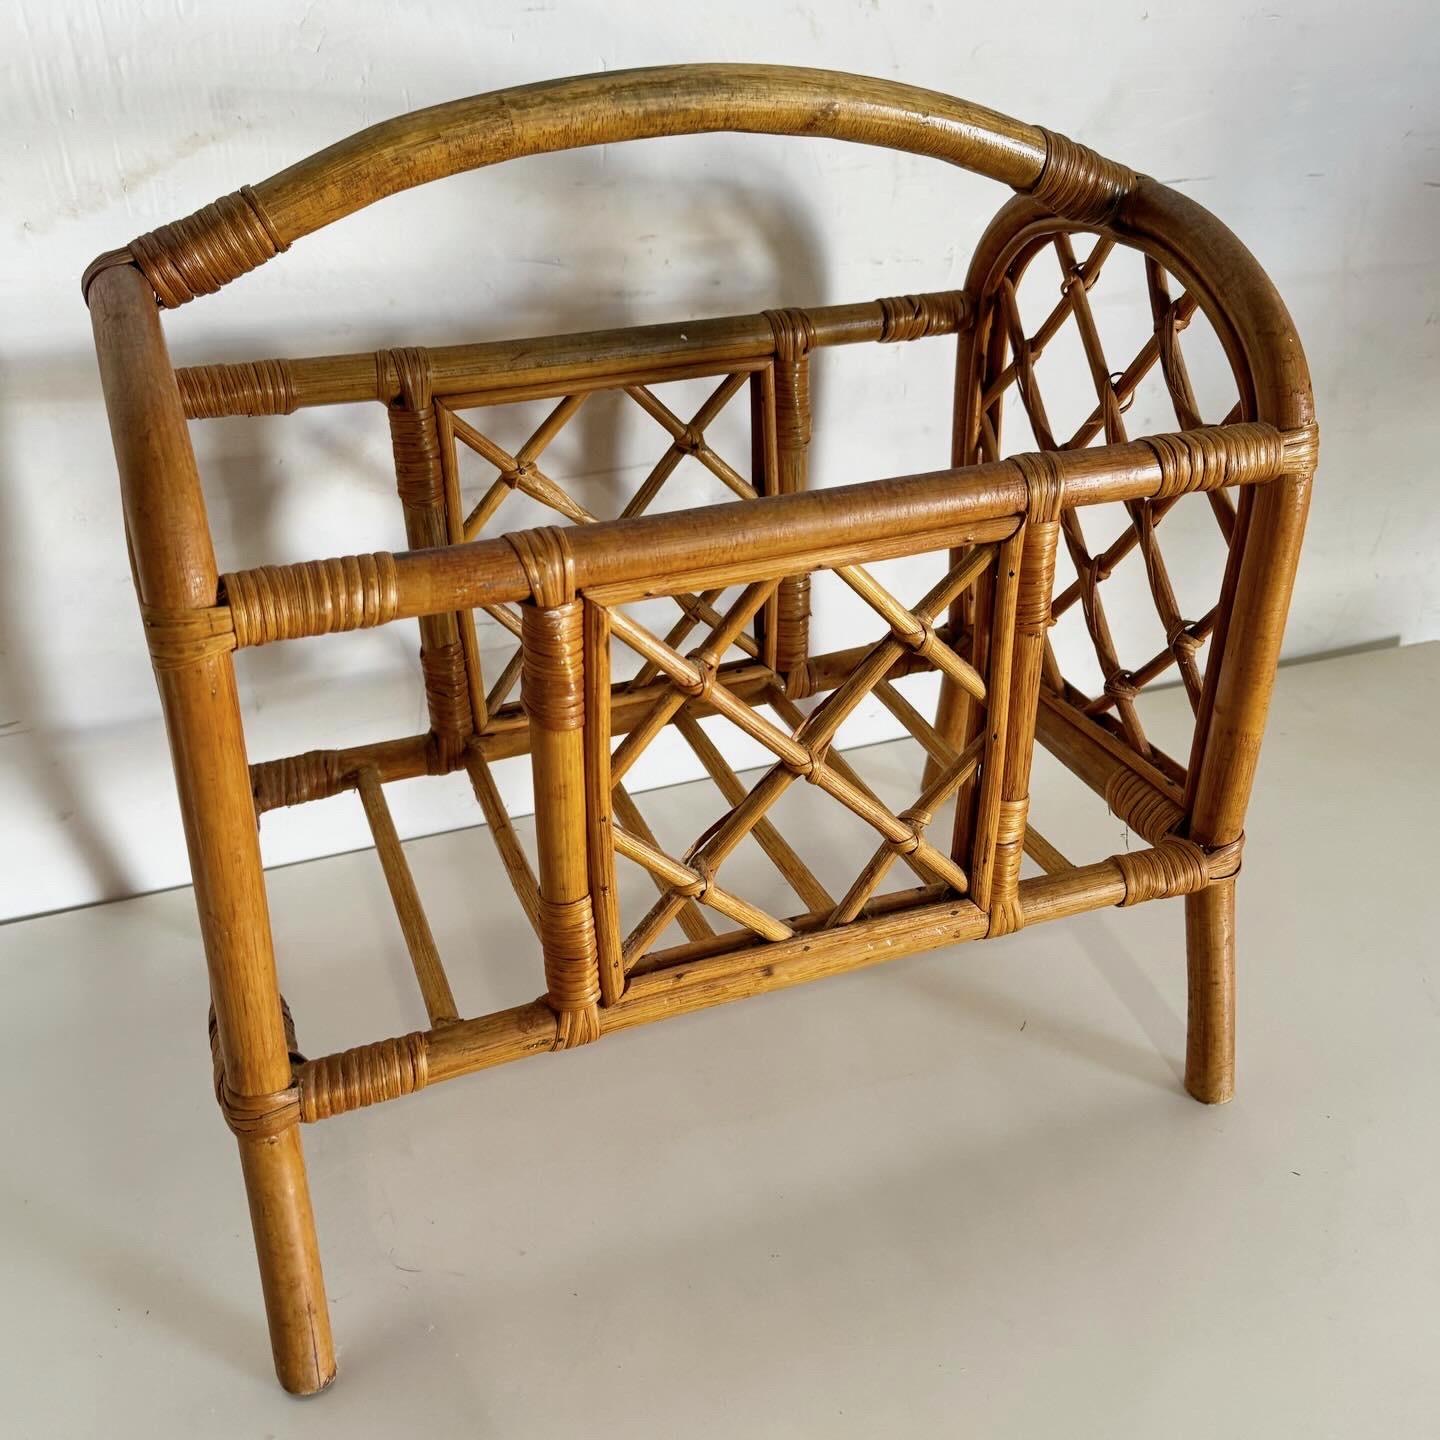 Introduce a touch of bohemian elegance to your space with the Boho Chic Bamboo Rattan Magazine Rack. This beautifully crafted piece combines the durability of bamboo with the intricate texture of woven rattan, offering a stylish solution for